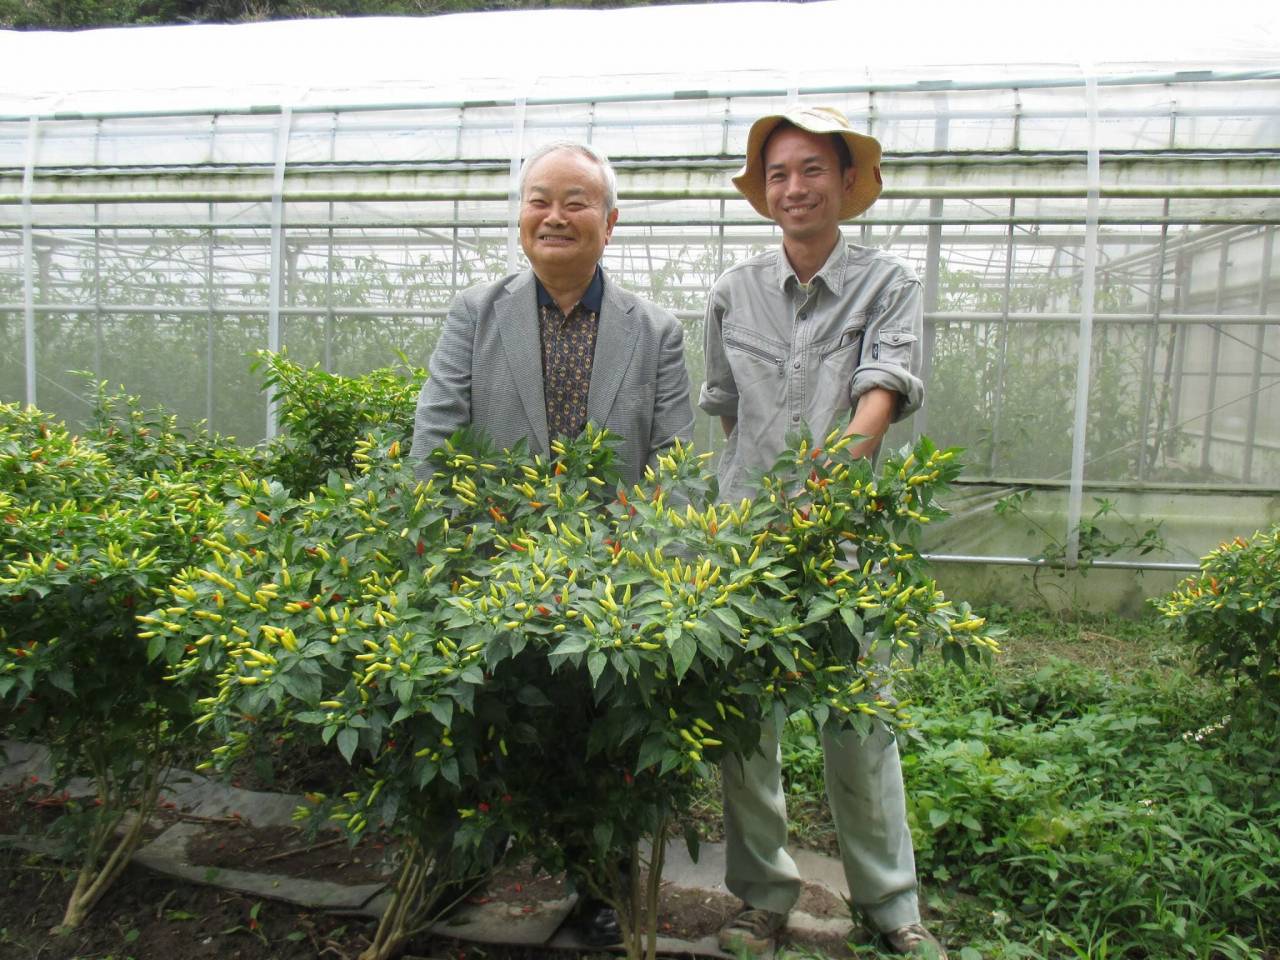 Prof. Higa and the manager of the farm